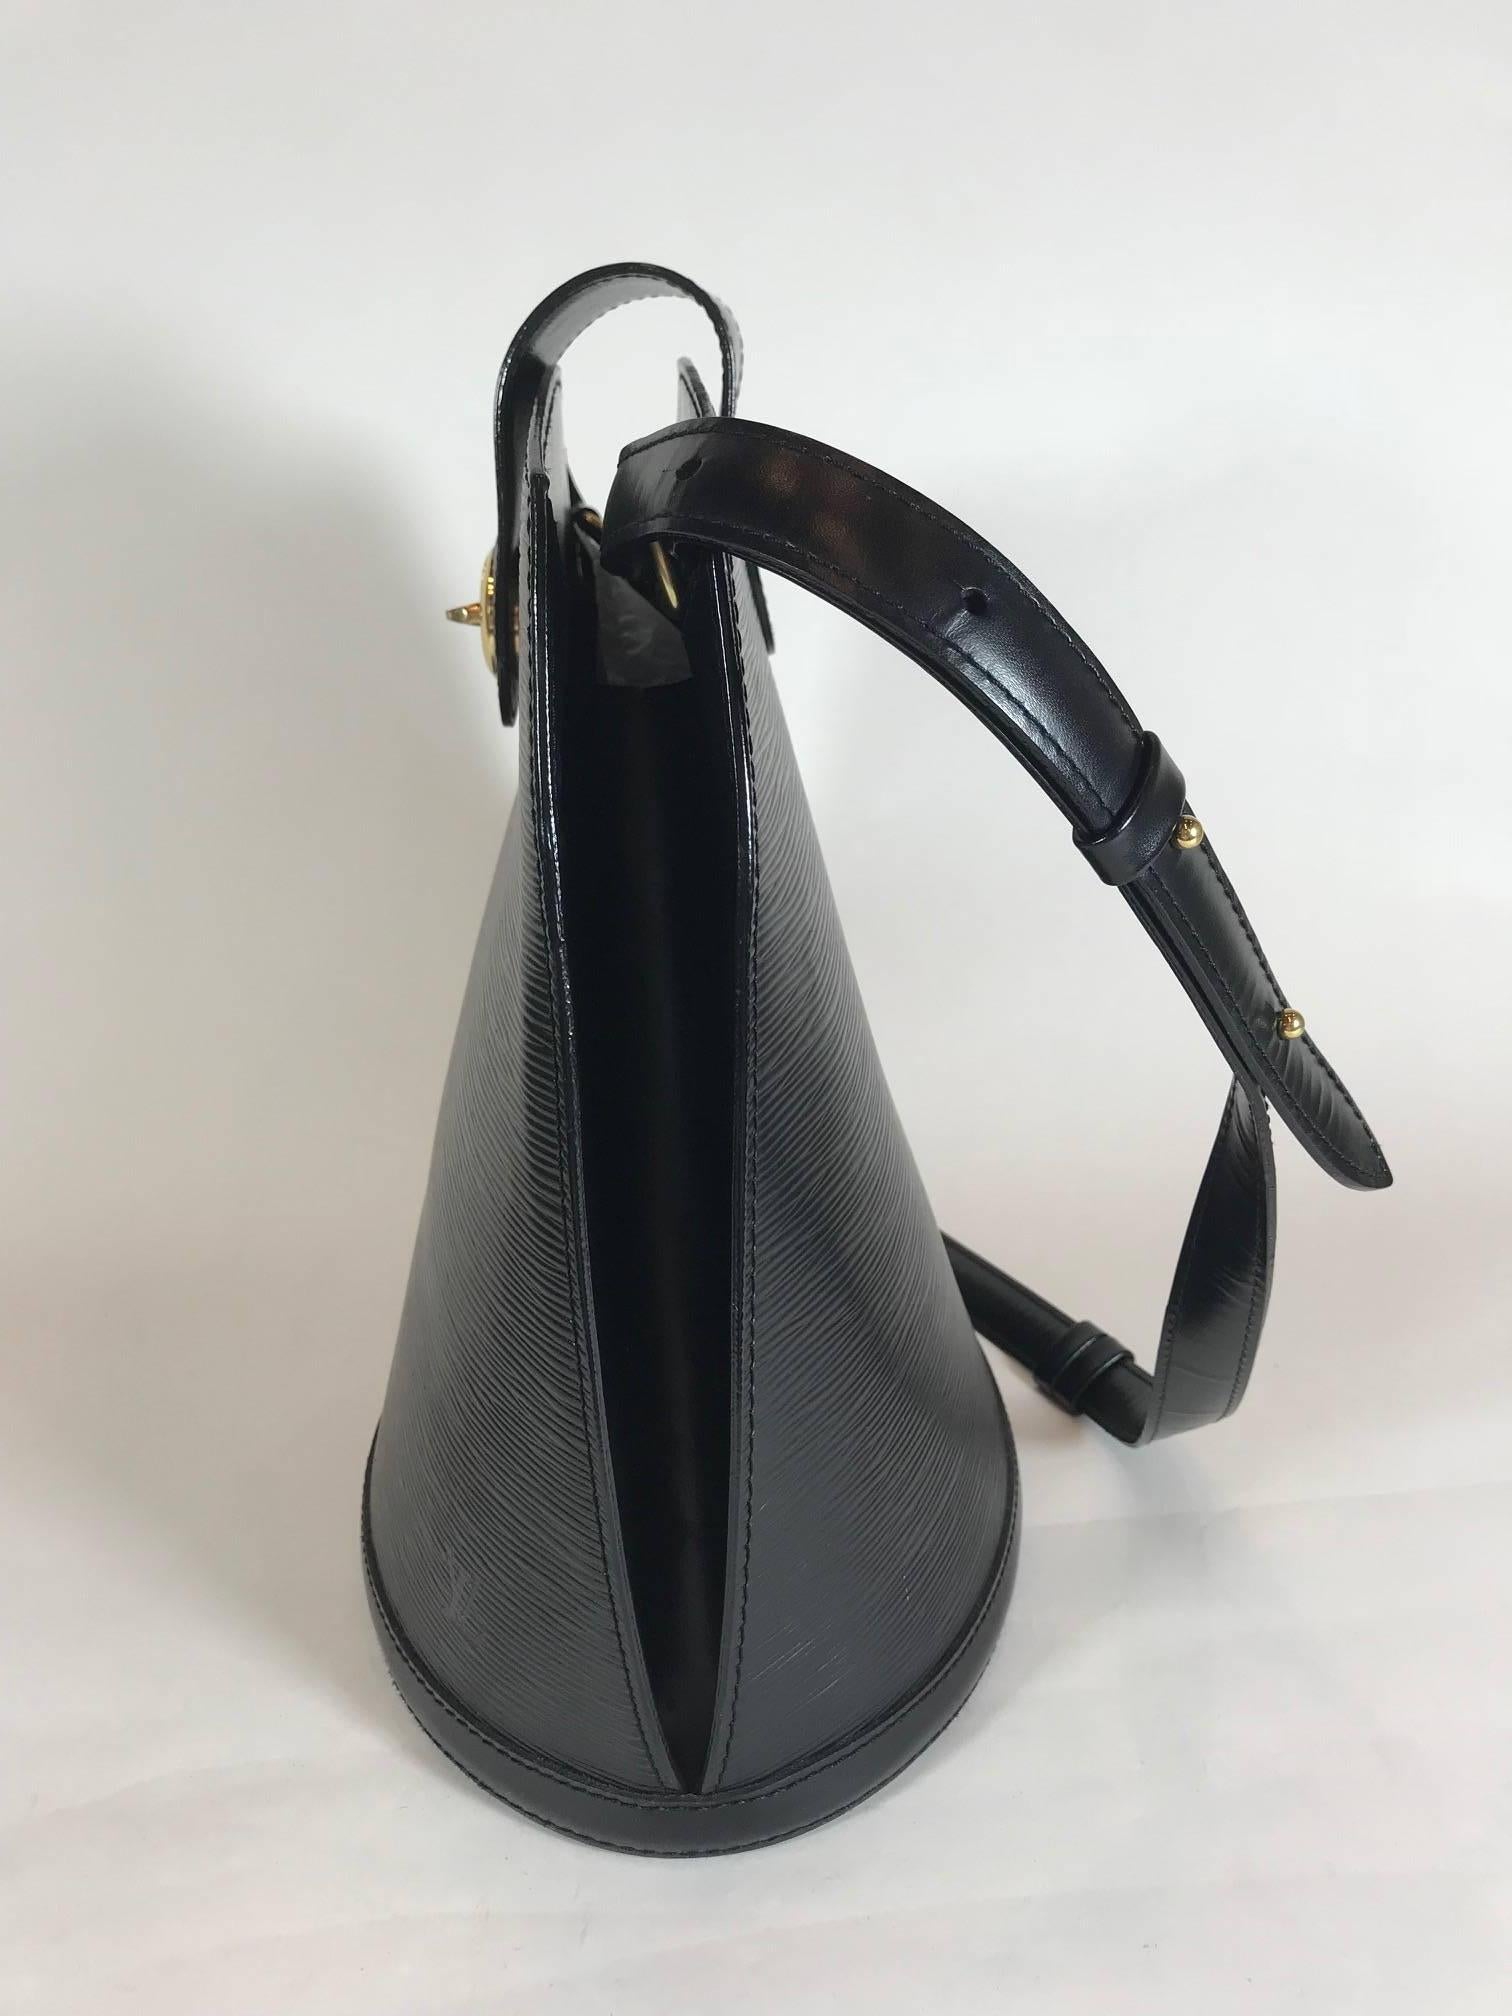 Louis Vuitton Epi Cluny Bag In Excellent Condition For Sale In Roslyn, NY